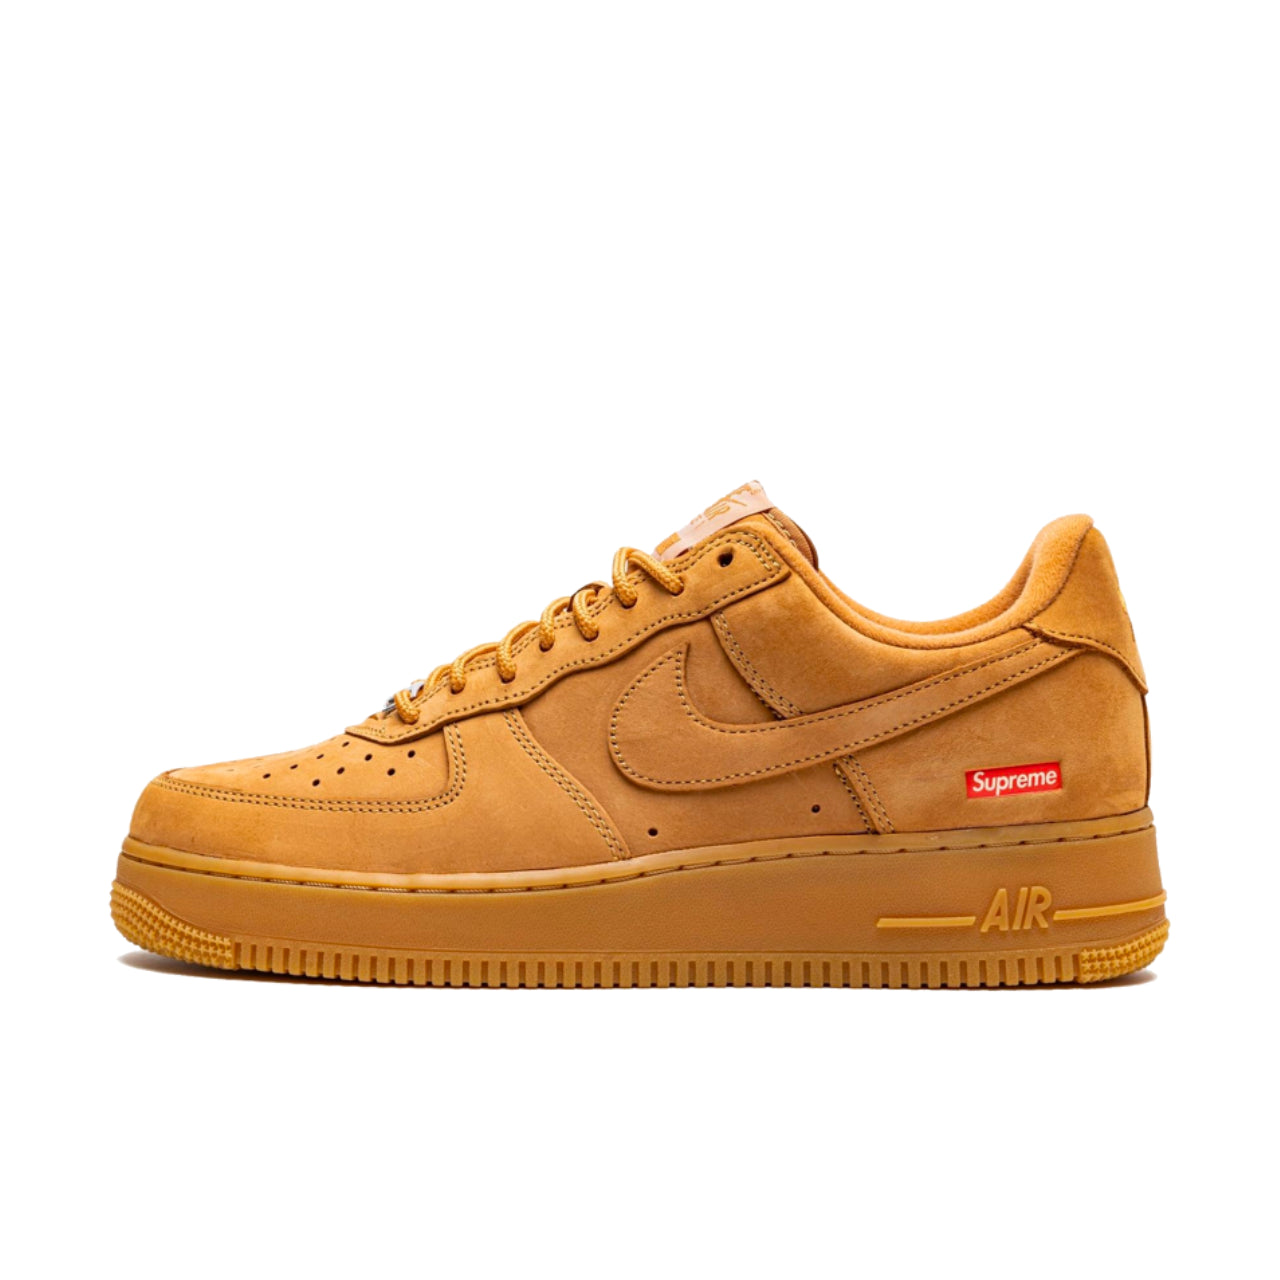 Nike Air Force 1 Low SP Supreme Wheat - DN1555-200 - Left